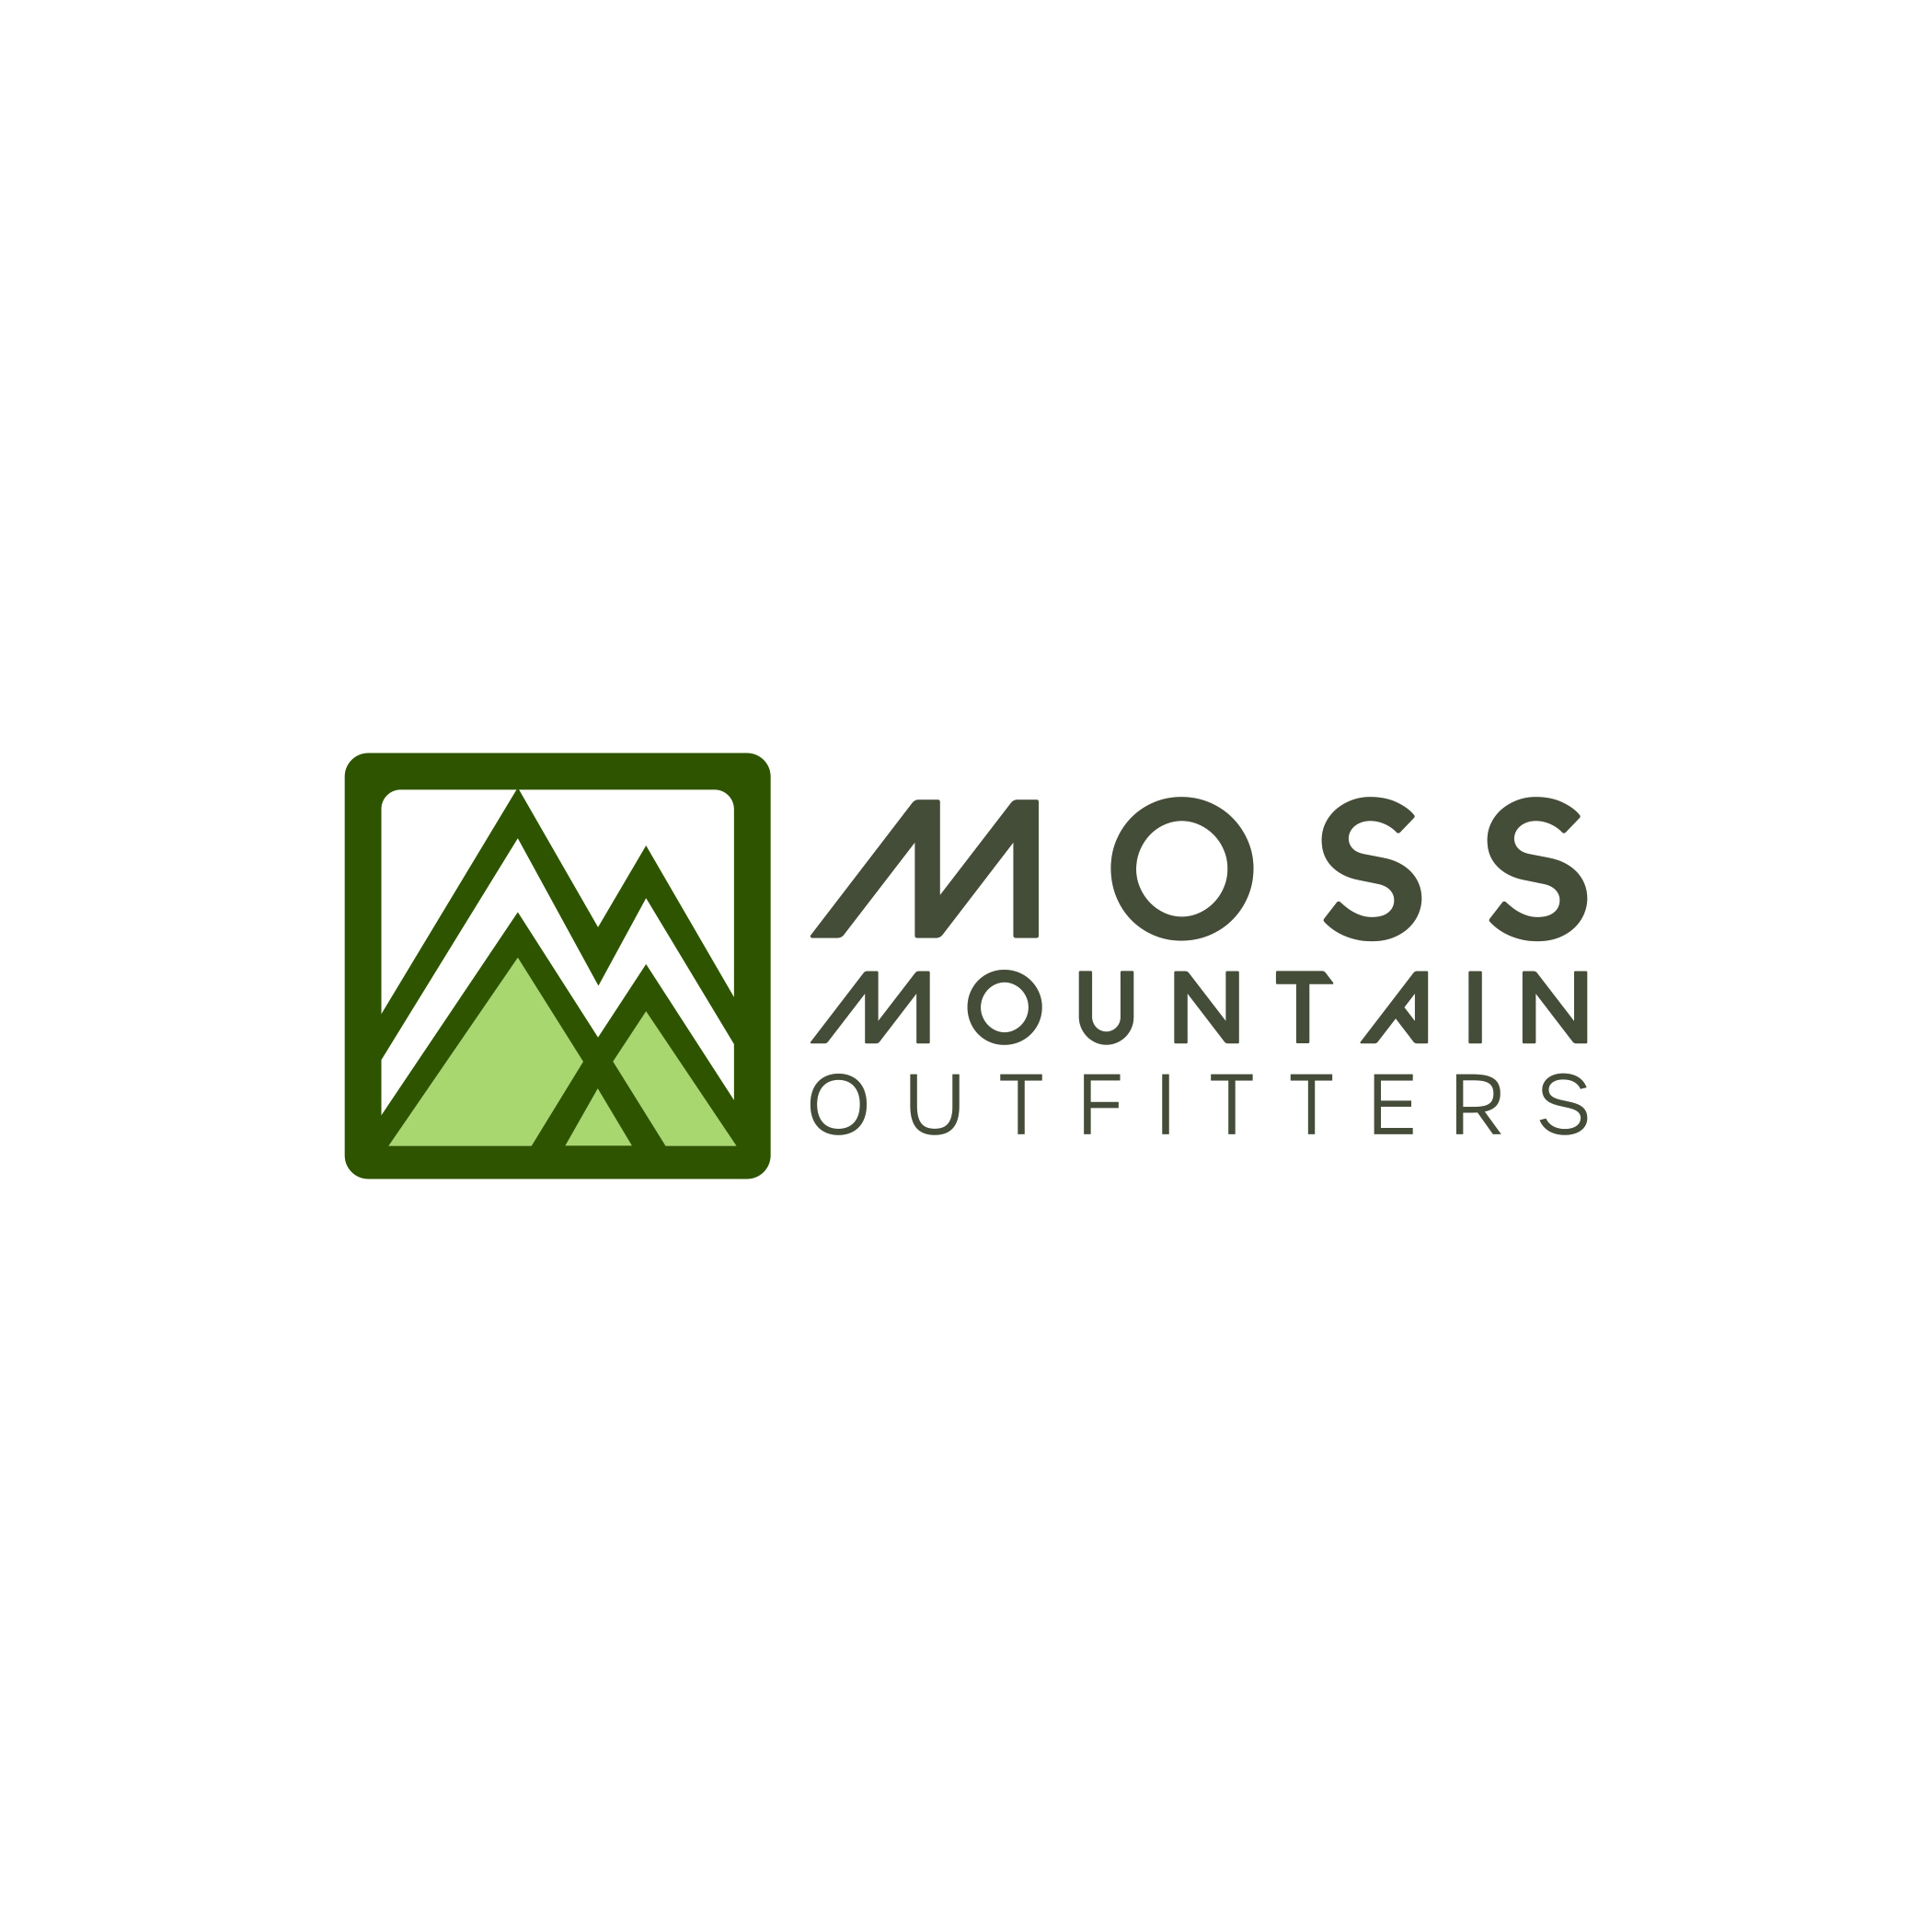 Moss Mountain Outfitters logo-SM square.jpg